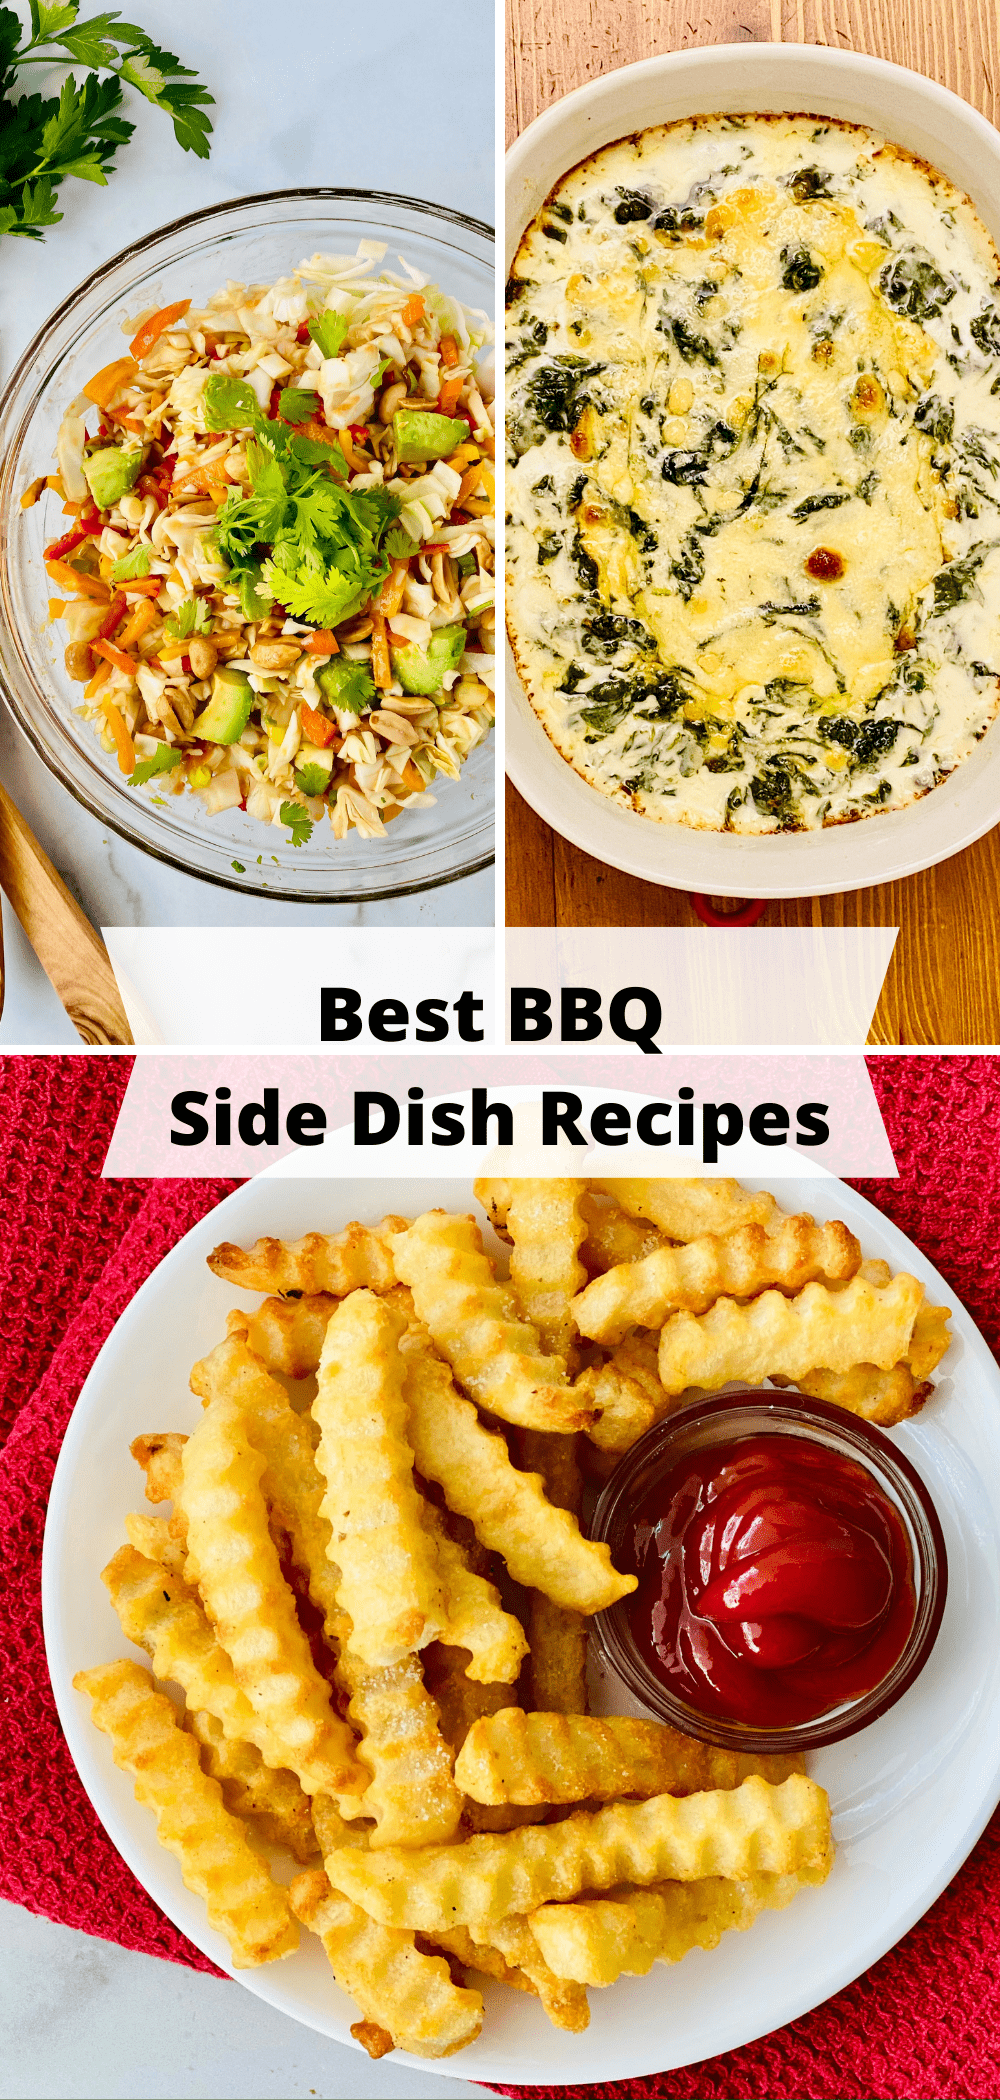 3 recipes for sides like fries, slaw, and creamed spinach.